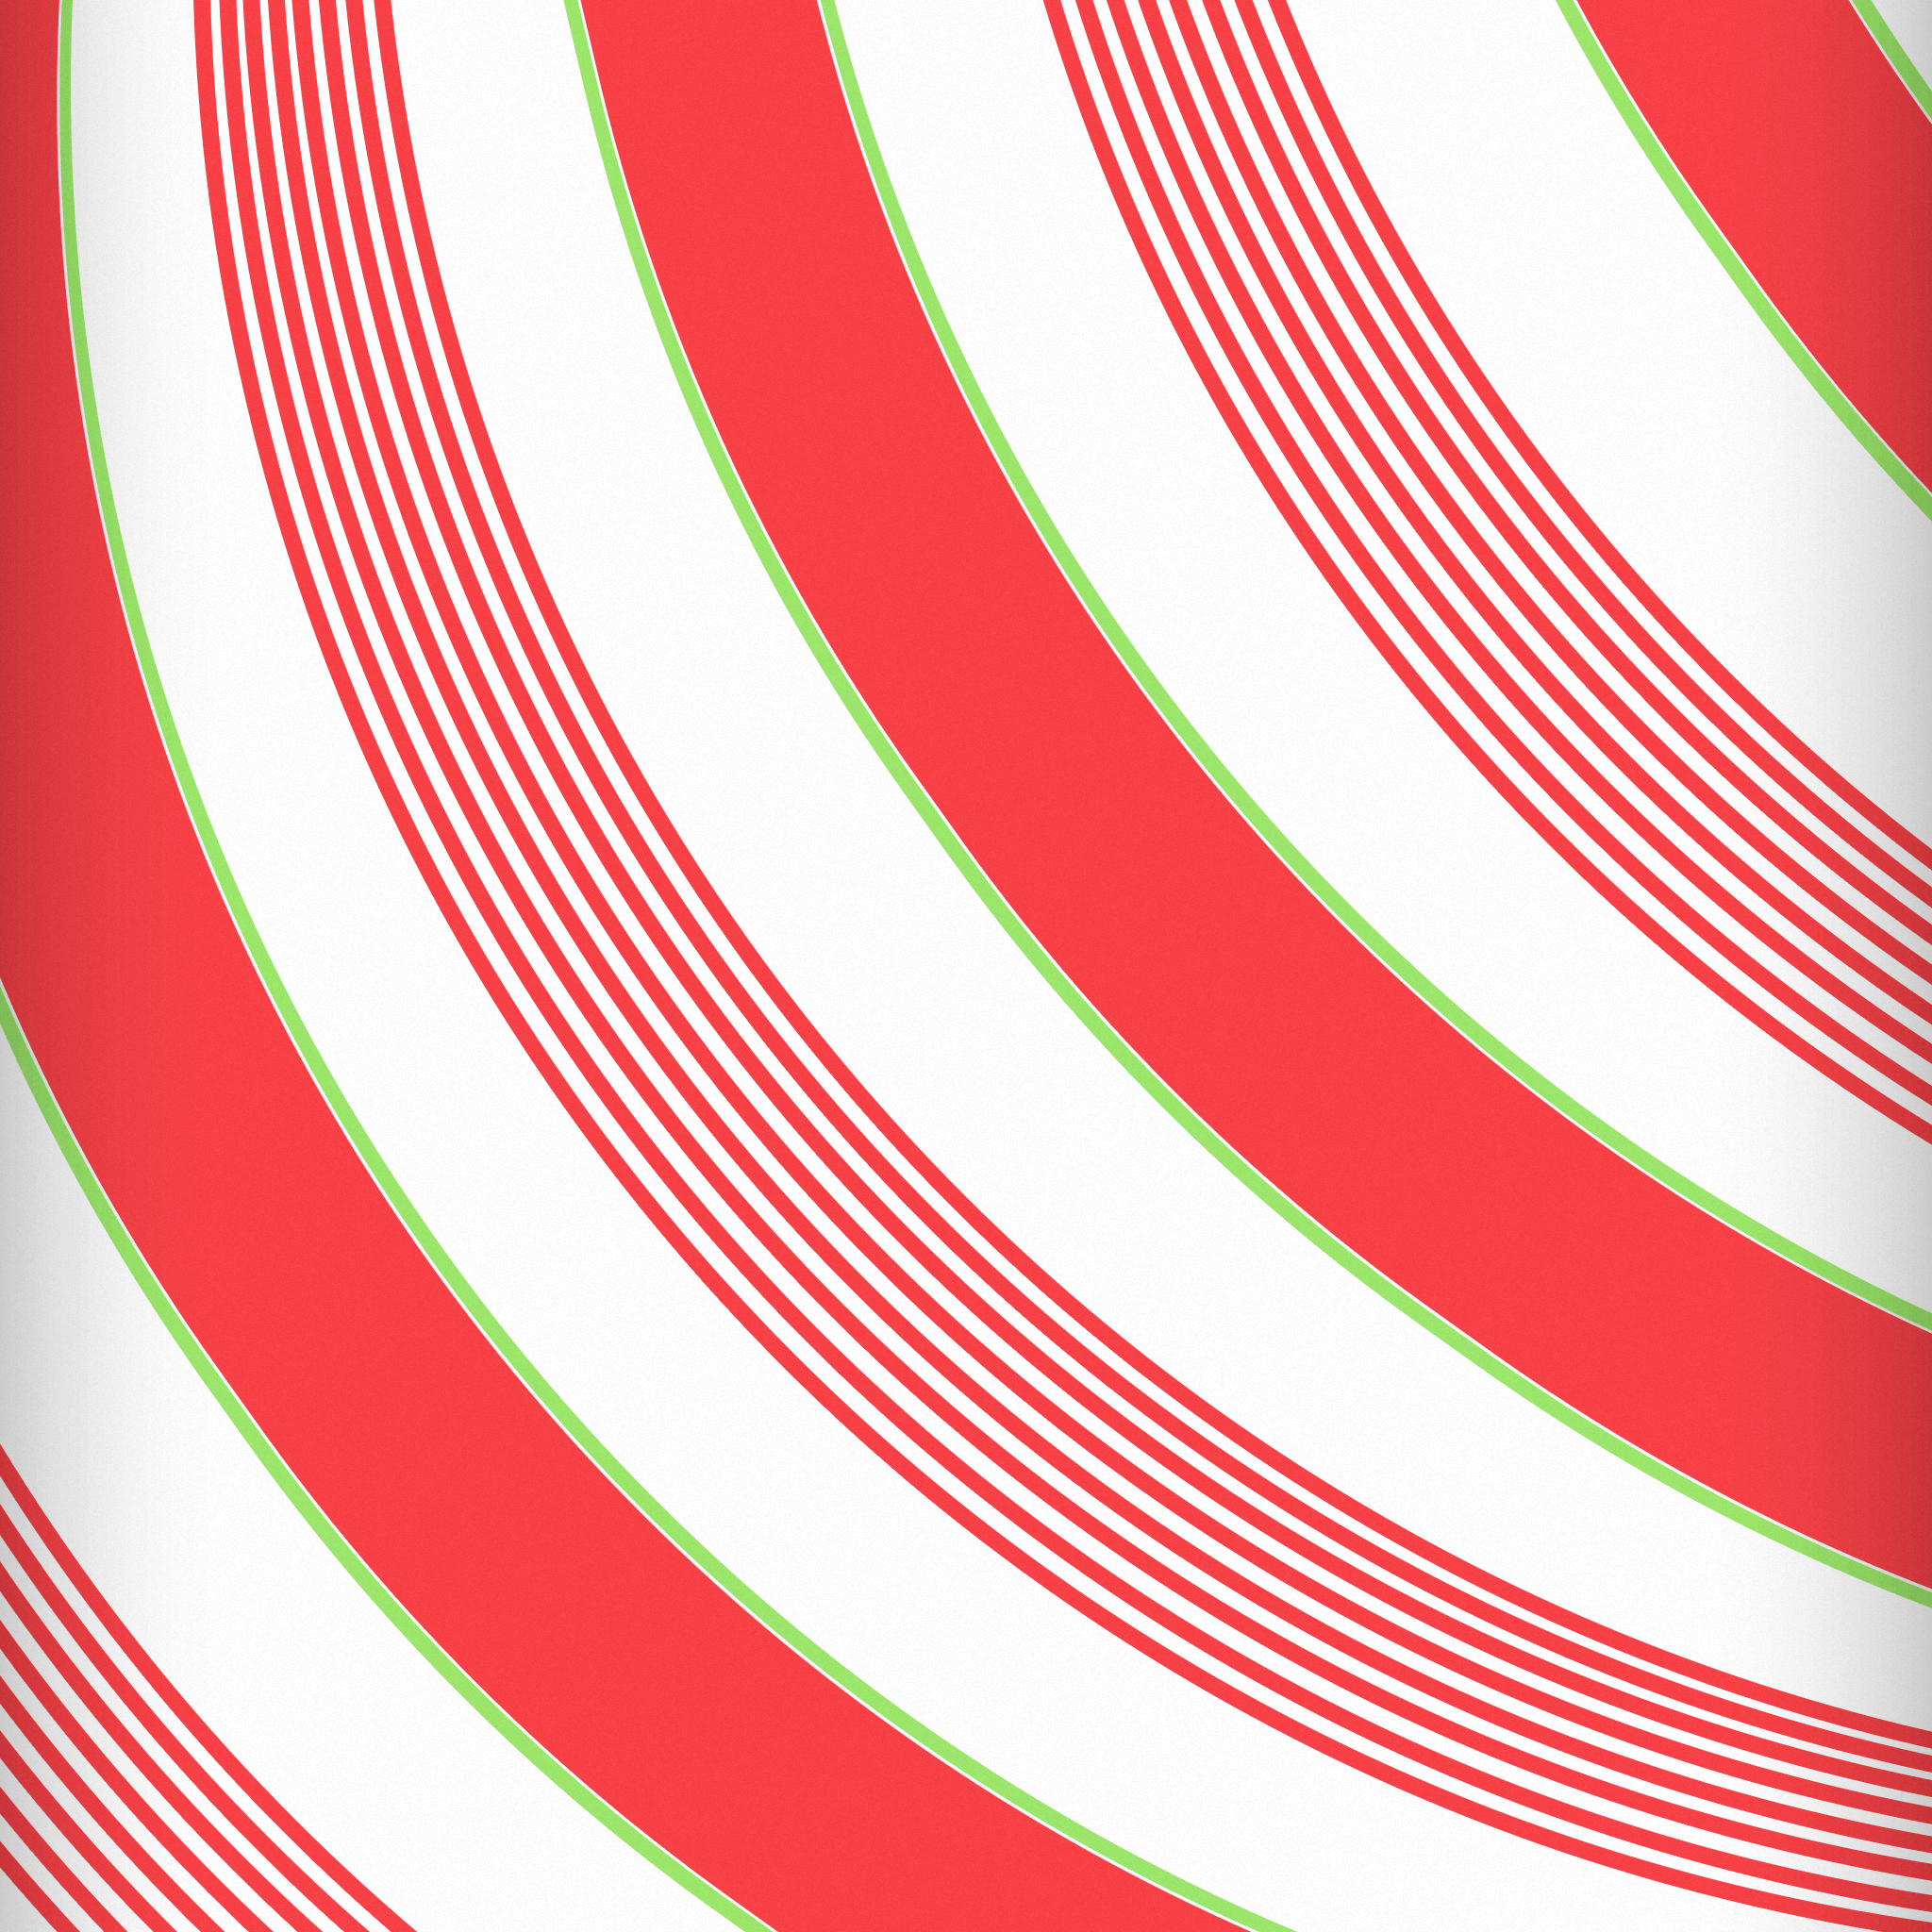 Wallpaper of the week: candy canes and gingerbread men